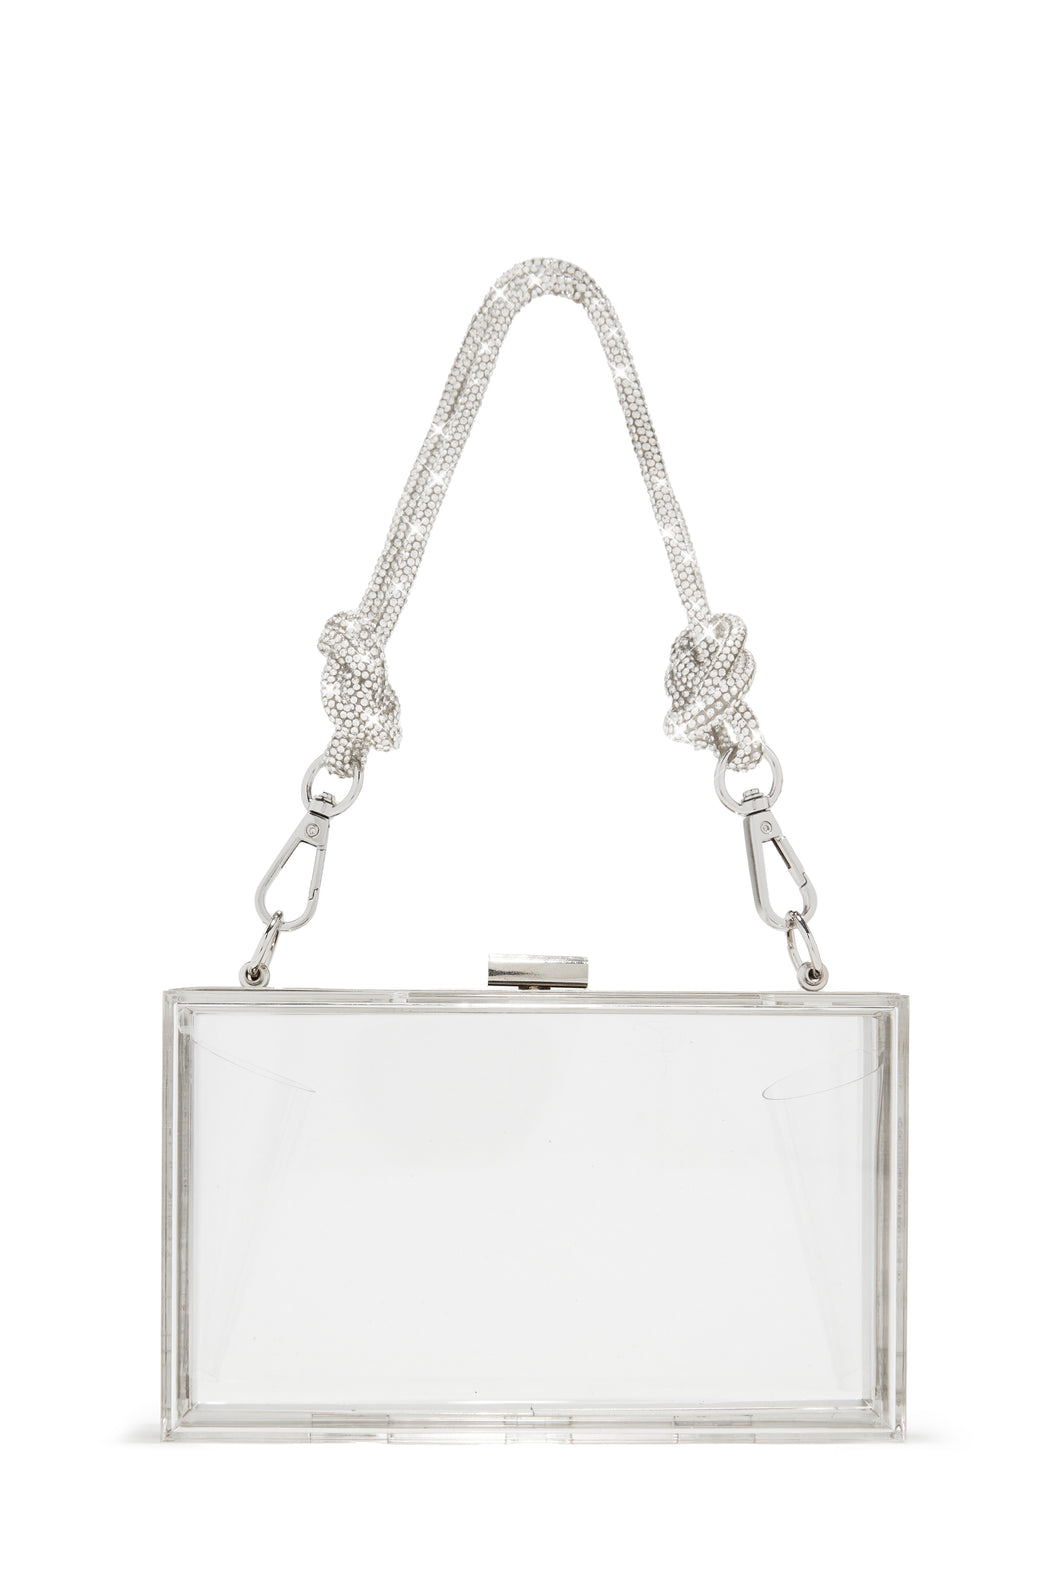 Script Clear Acrylic Clutch - A Touch of Sparkle